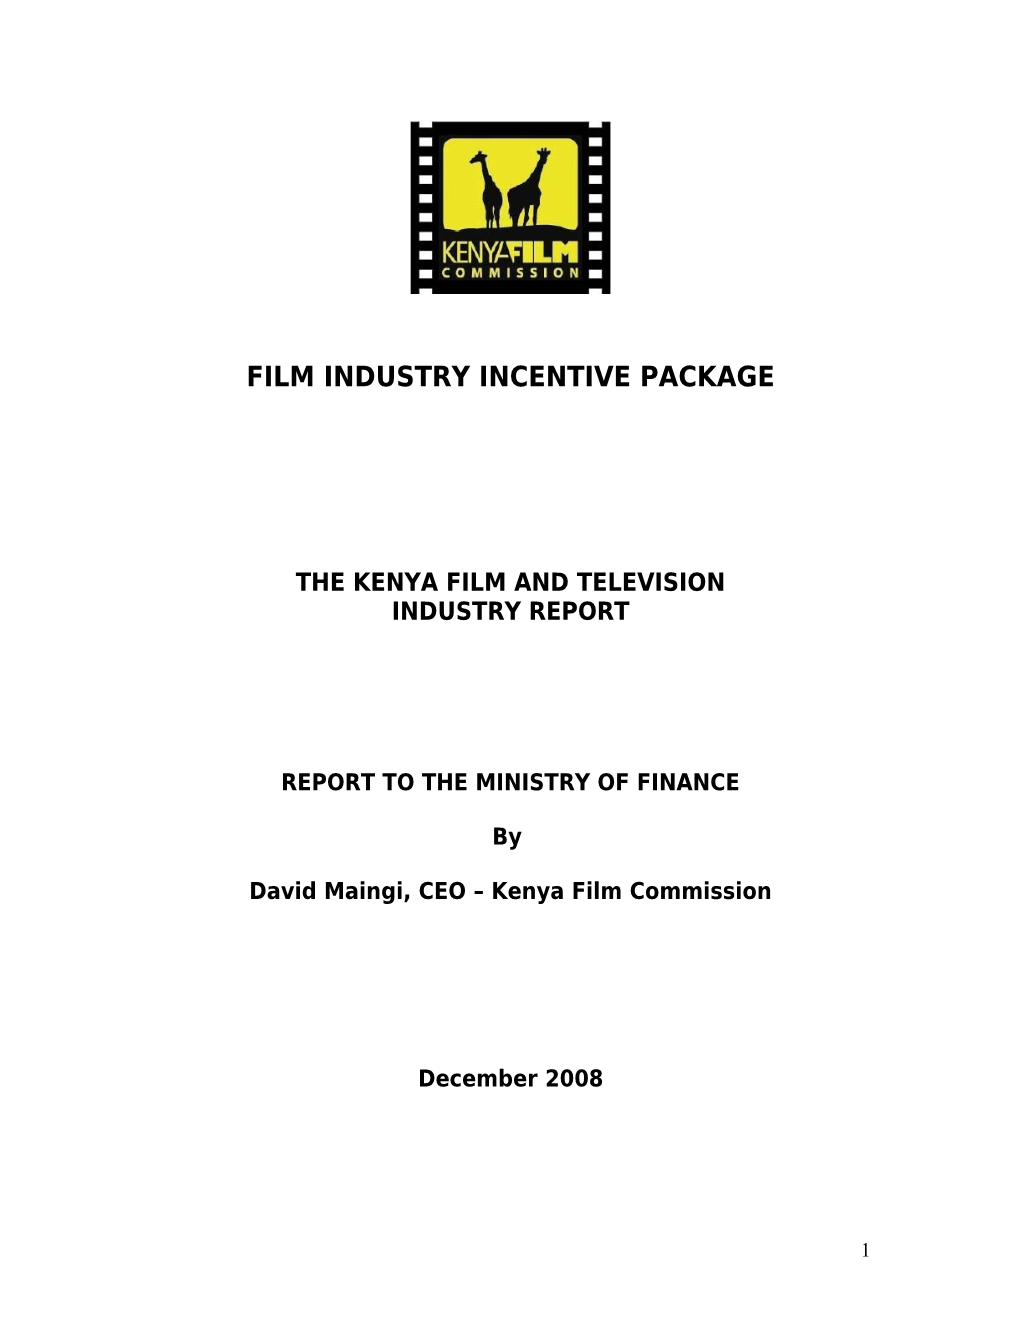 Film Industry Incentive Package